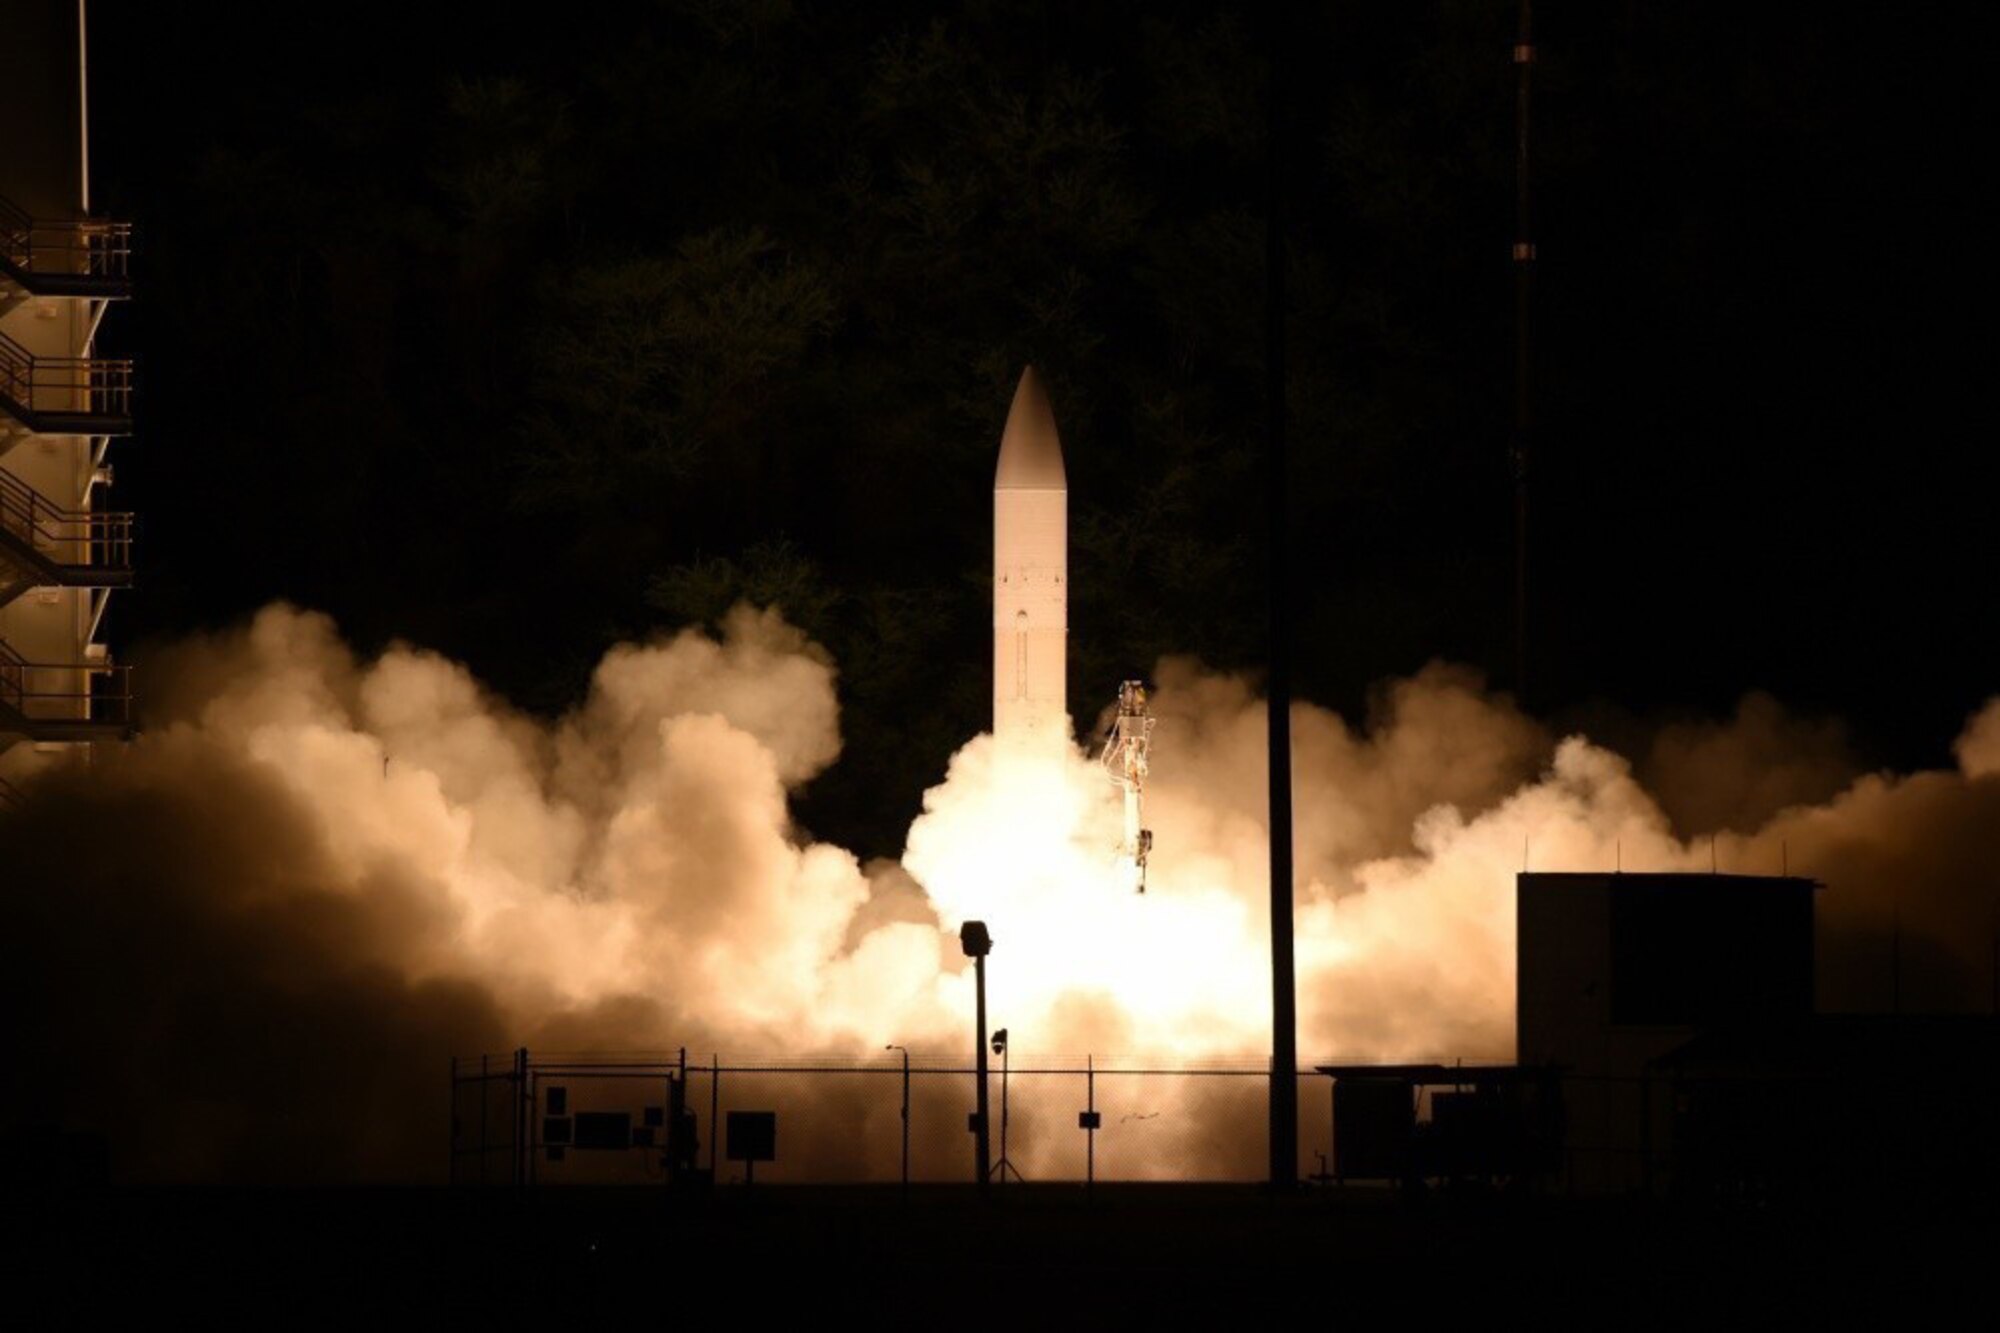 A white rocket launches at night.